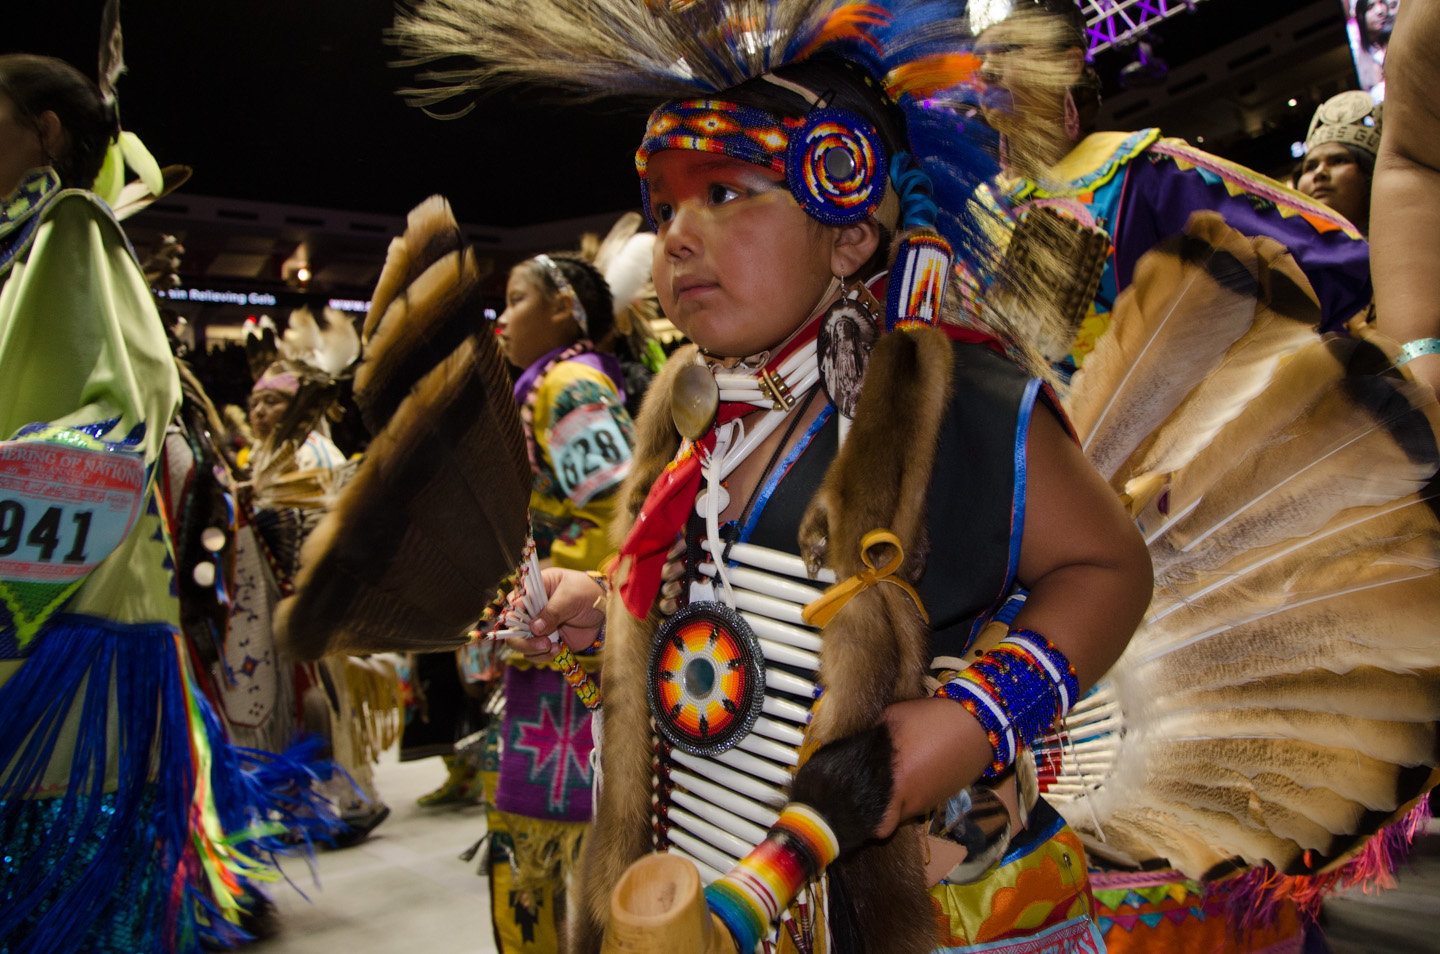 Young dancers make their way into the arena during intertribal dance.